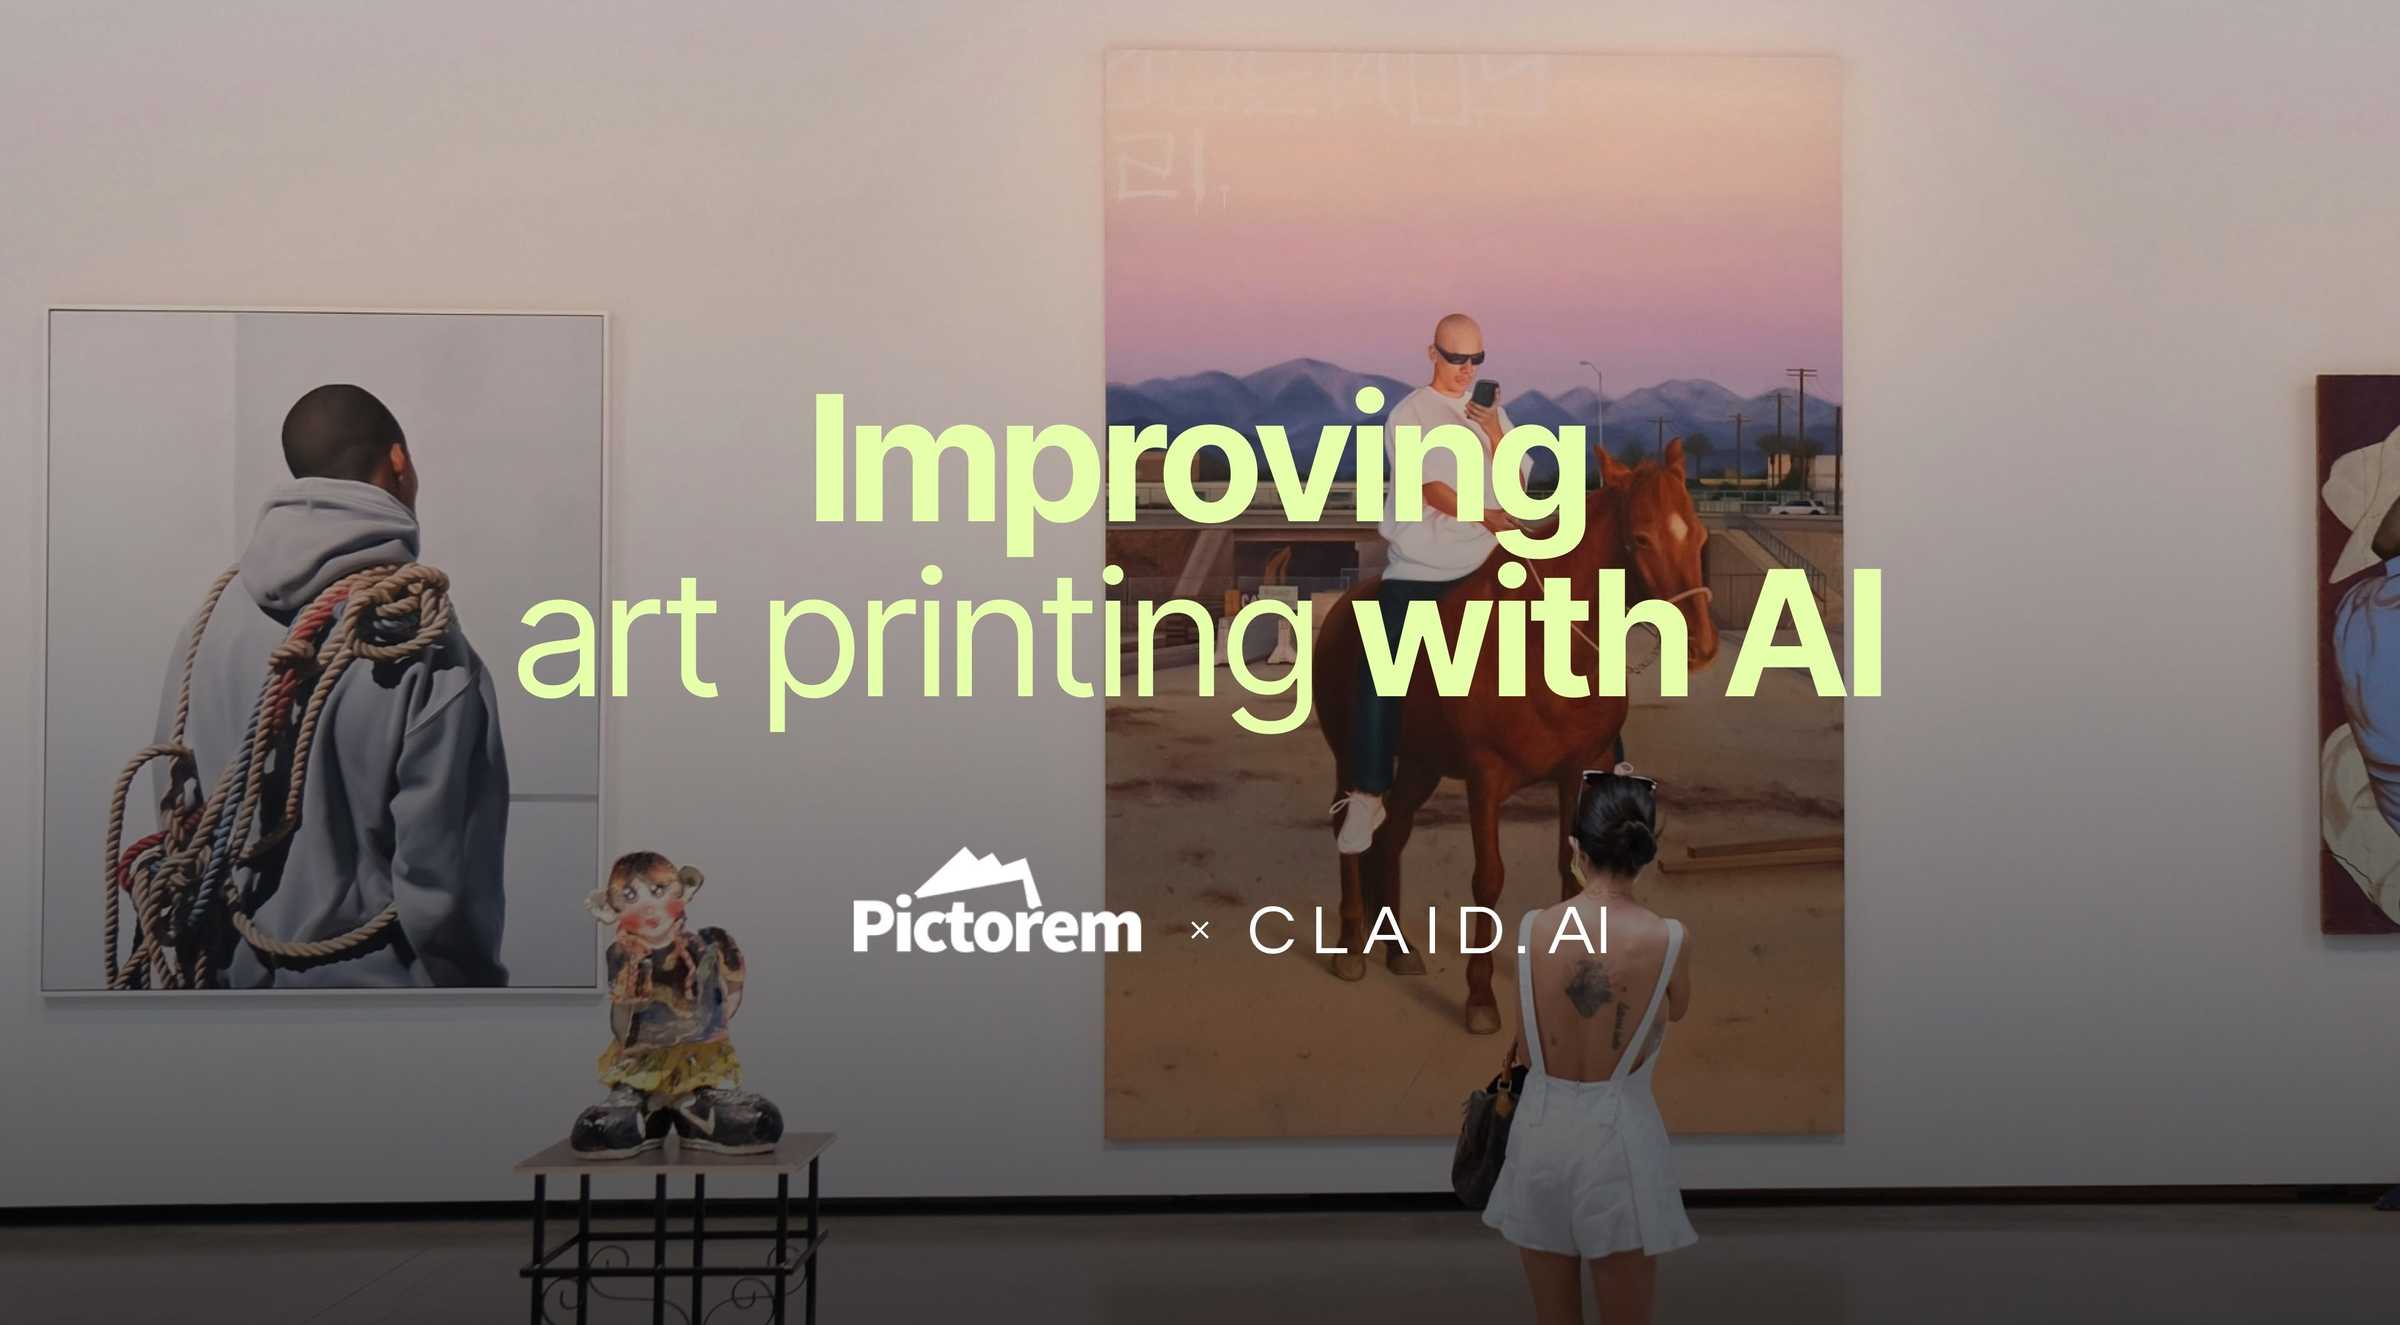 Picture for Pictorem & Claid: Making Art Printing Better with AI article